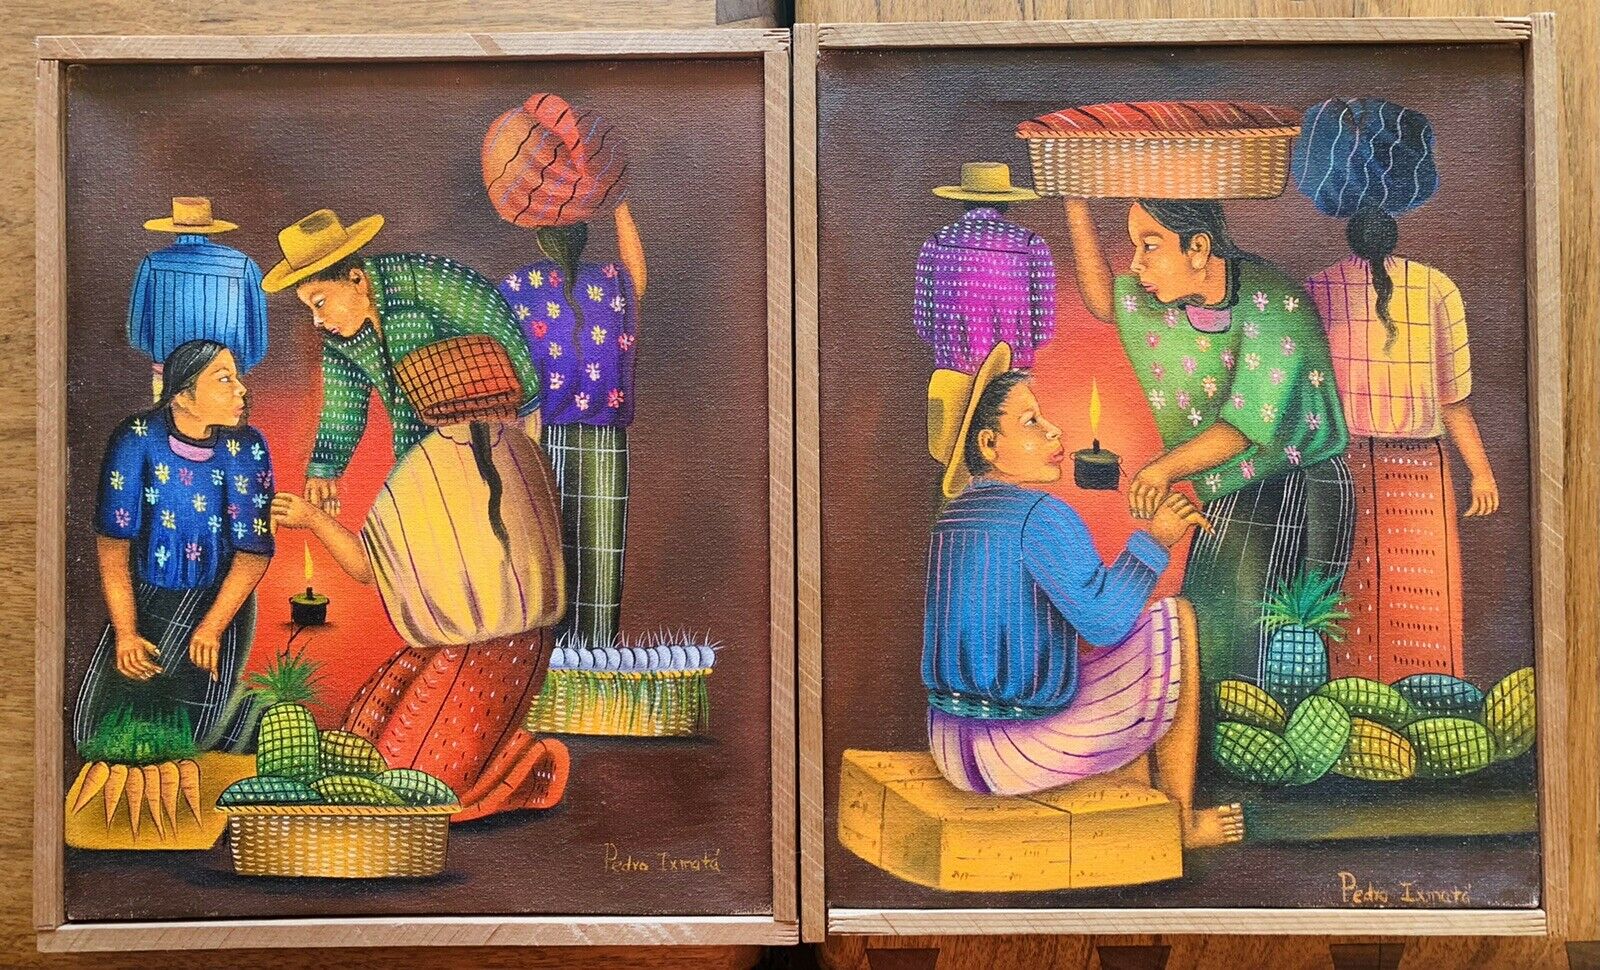 2 Traditional Indigenous Signed Mayan Oil Paintings In The Tz’utujil Tradition.